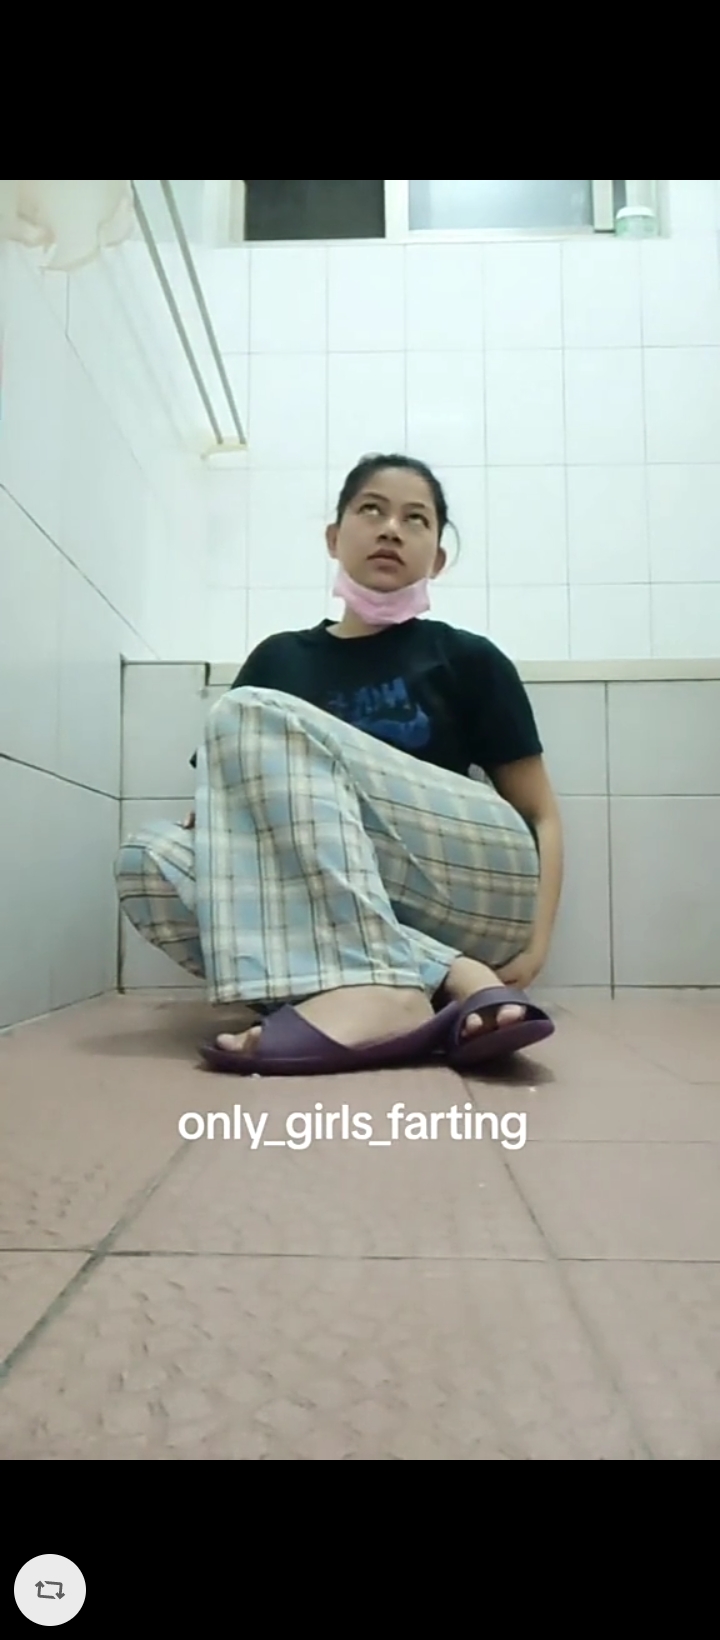 Indonesian girl farts on hand